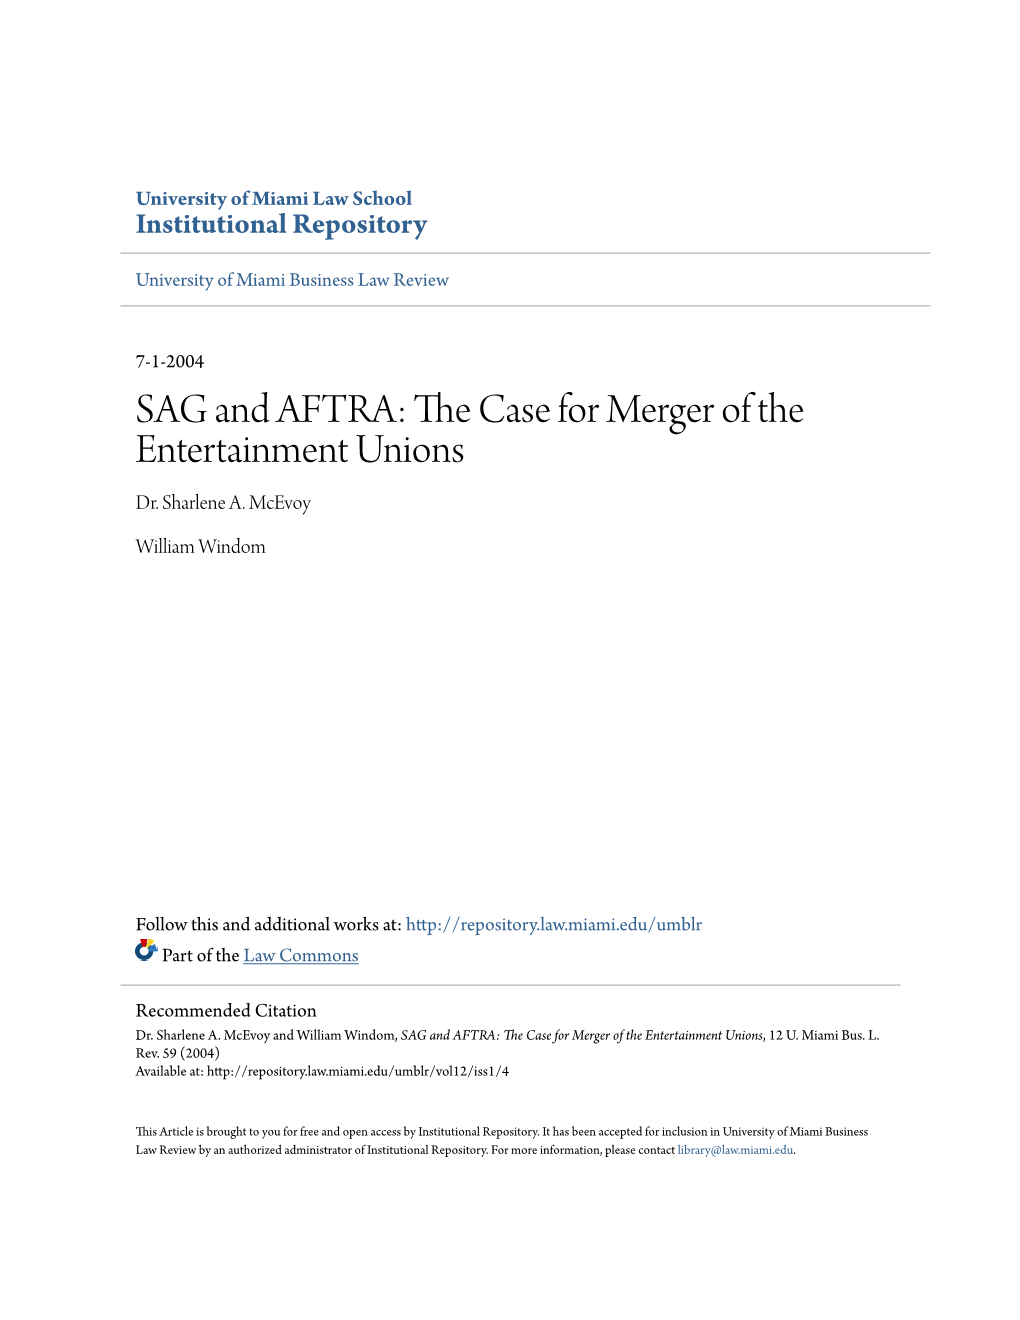 SAG and AFTRA: the Ac Se for Merger of the Entertainment Unions Dr